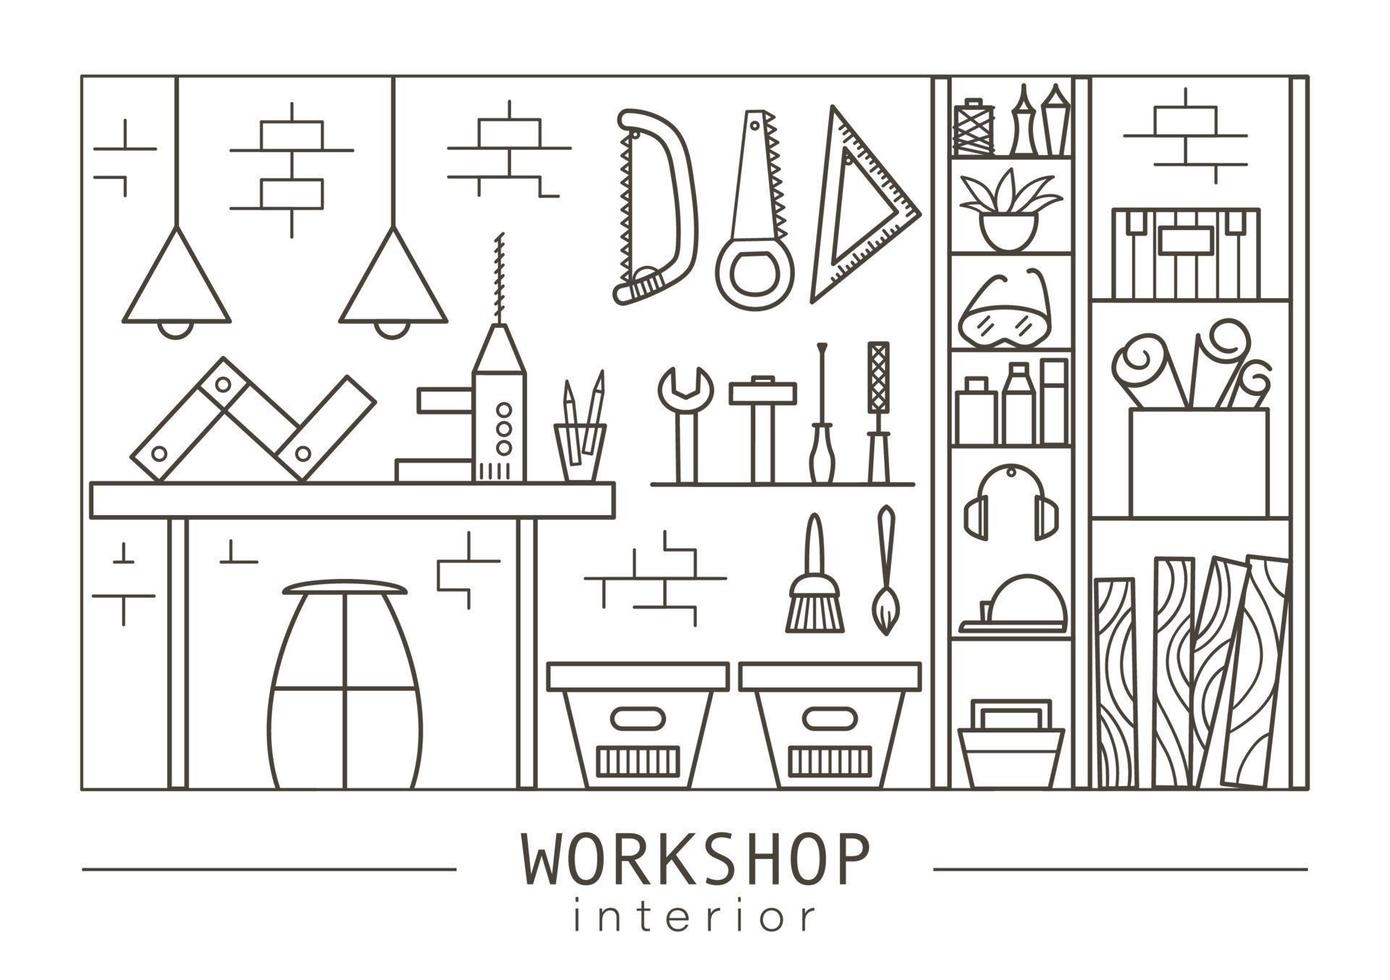 Vector linear art workshop interior. Black and white line drawing of different tools and equipment with work bench, cabinet, shelves, boxes. Carpenter, worker or joiner shop illustration.